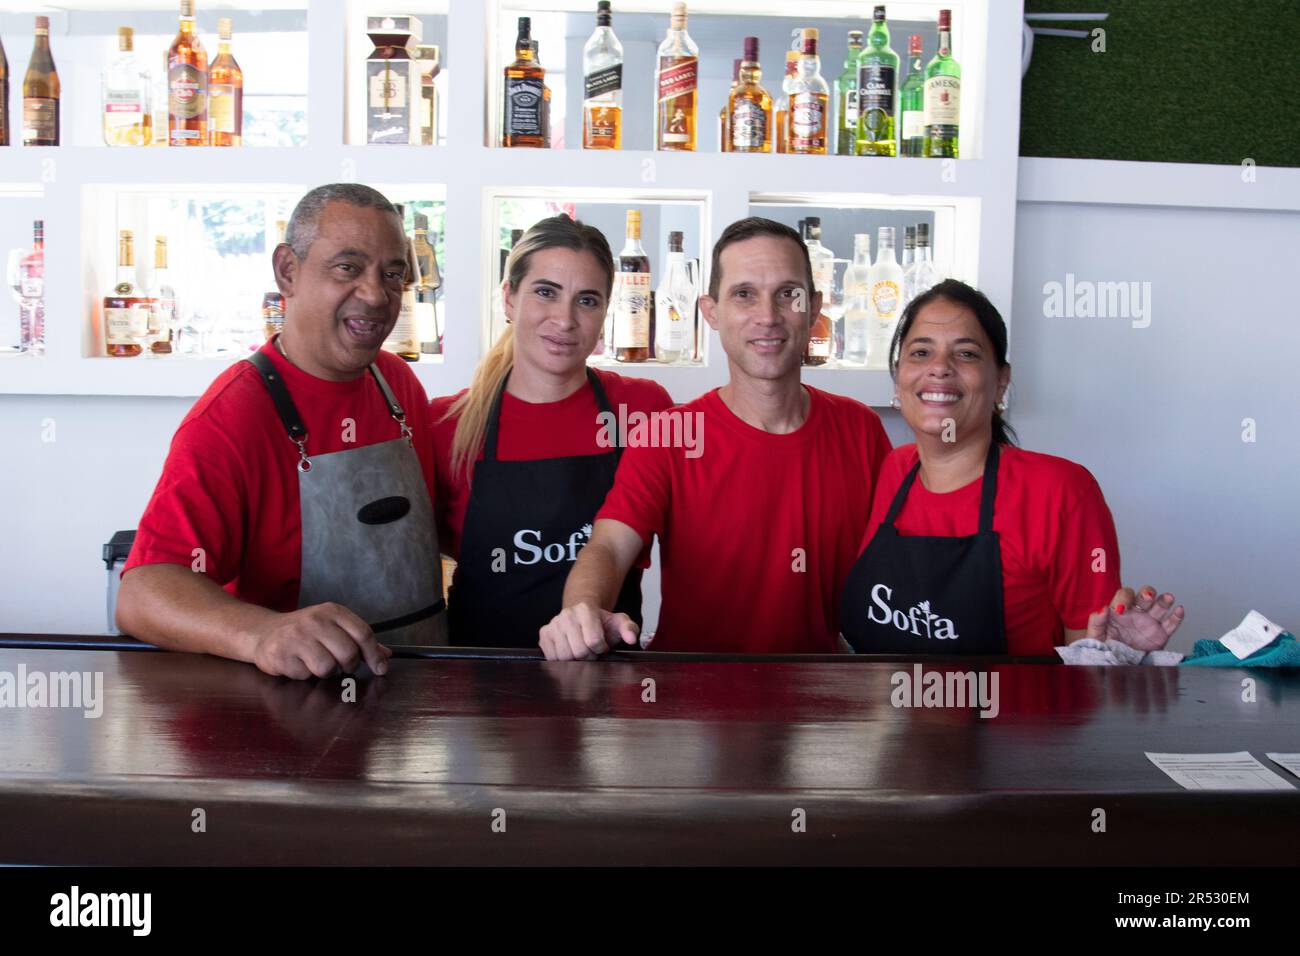 Cuban waiters smile at the camera in front of alcoholic beverages in La Habana Cuba. Stock Photo